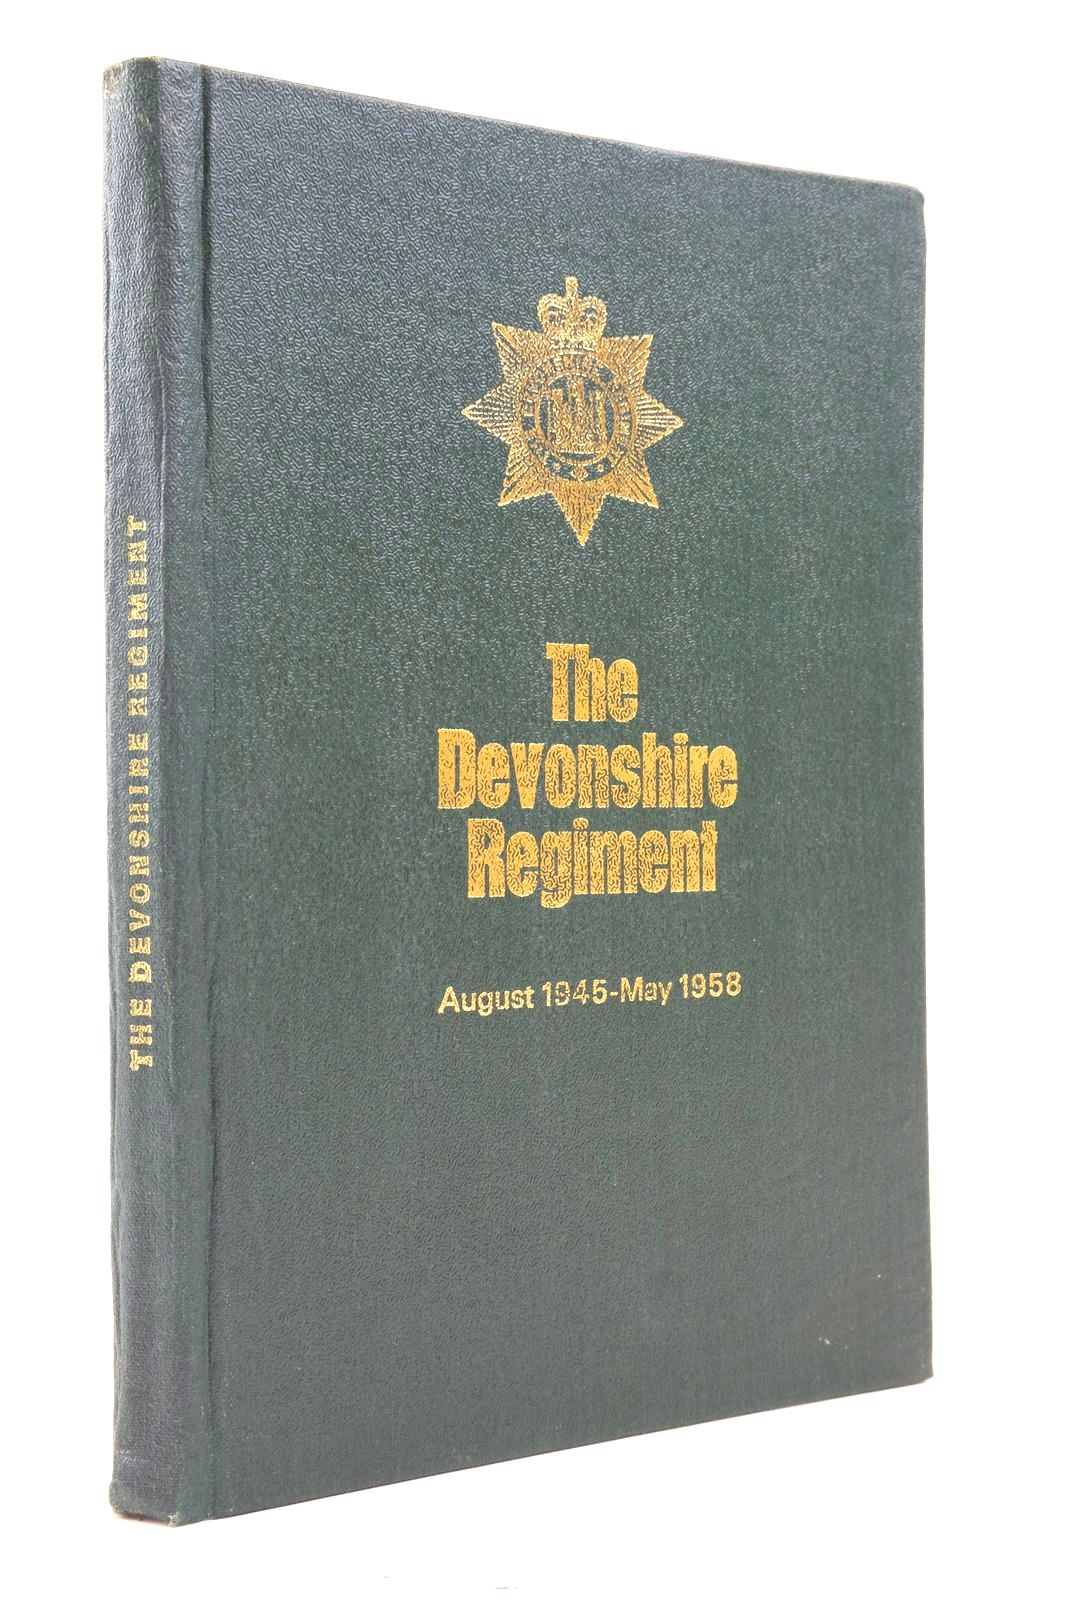 Photo of THE DEVONSHIRE REGIMENT AUGUST 1945-MAY 1958 written by Windeatt, J.K. published by The Forces Press (STOCK CODE: 2137542)  for sale by Stella & Rose's Books